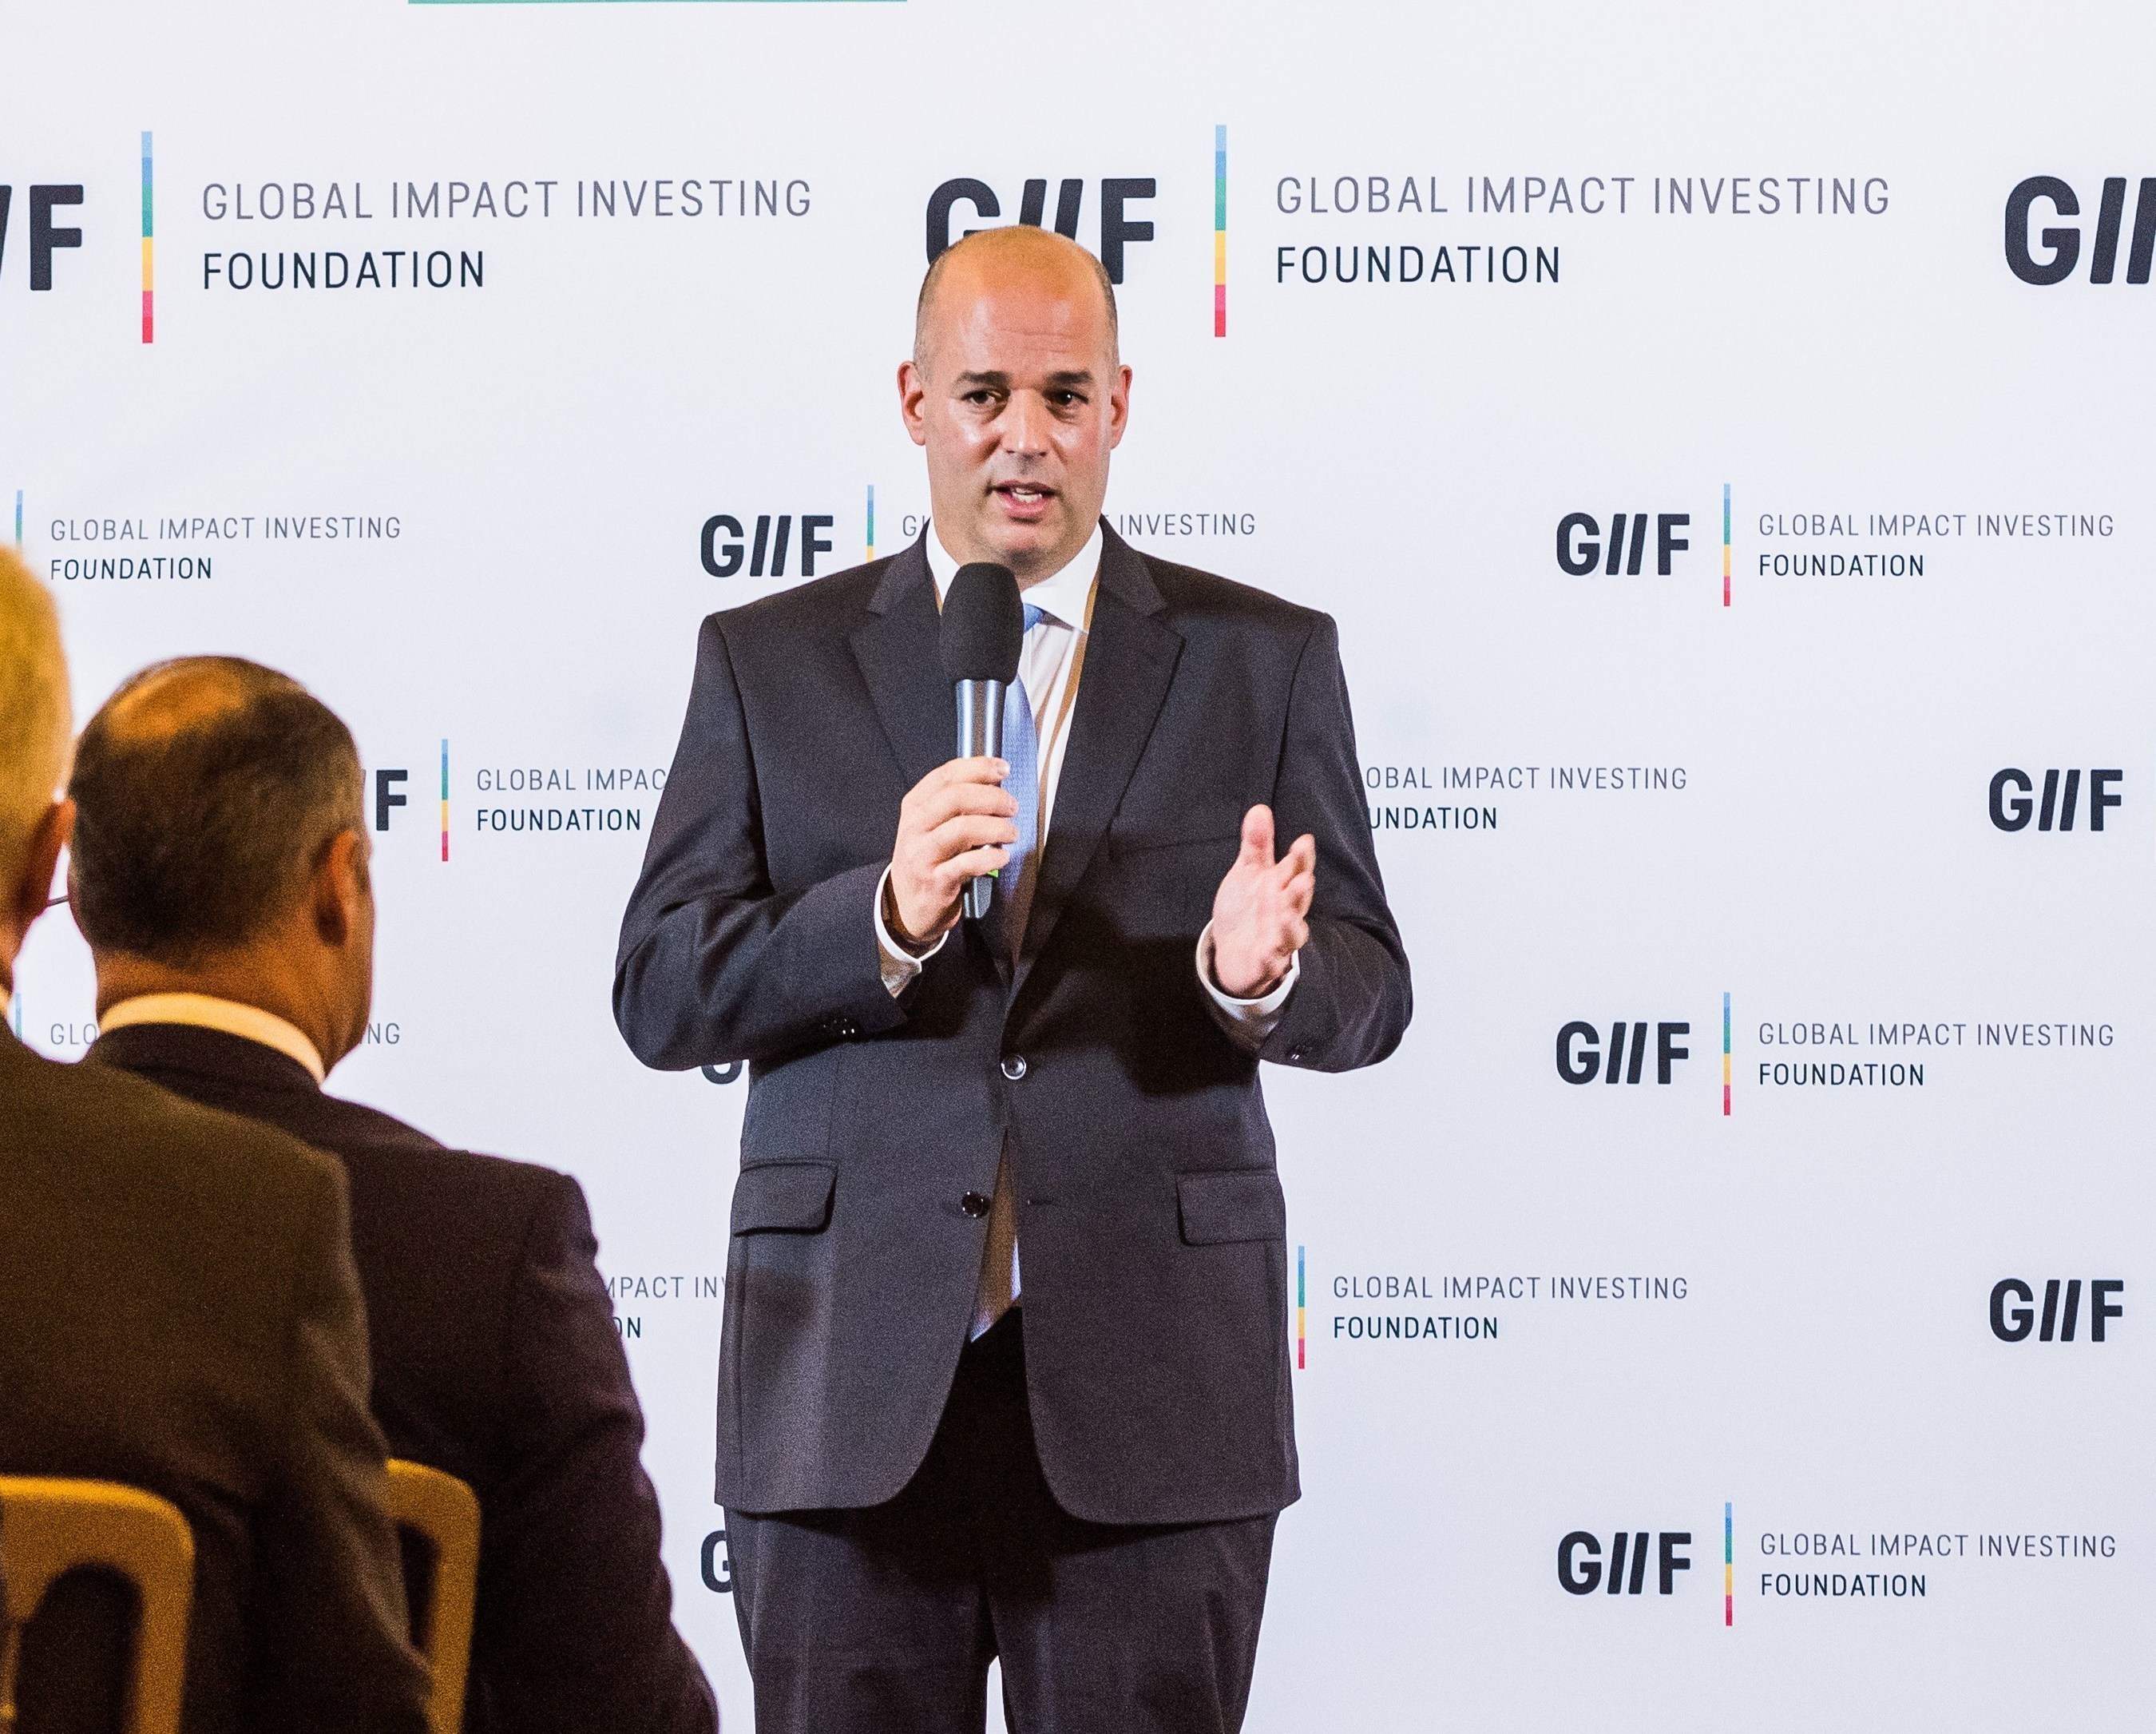 Austria and UNIDO sign Joint Declaration to support Global Impact Investment Foundation Major milestone for Impact Investment and Social Entrepreneurship achieved GIIF President Alon Shklarek (PRNewsFoto/GIIF)